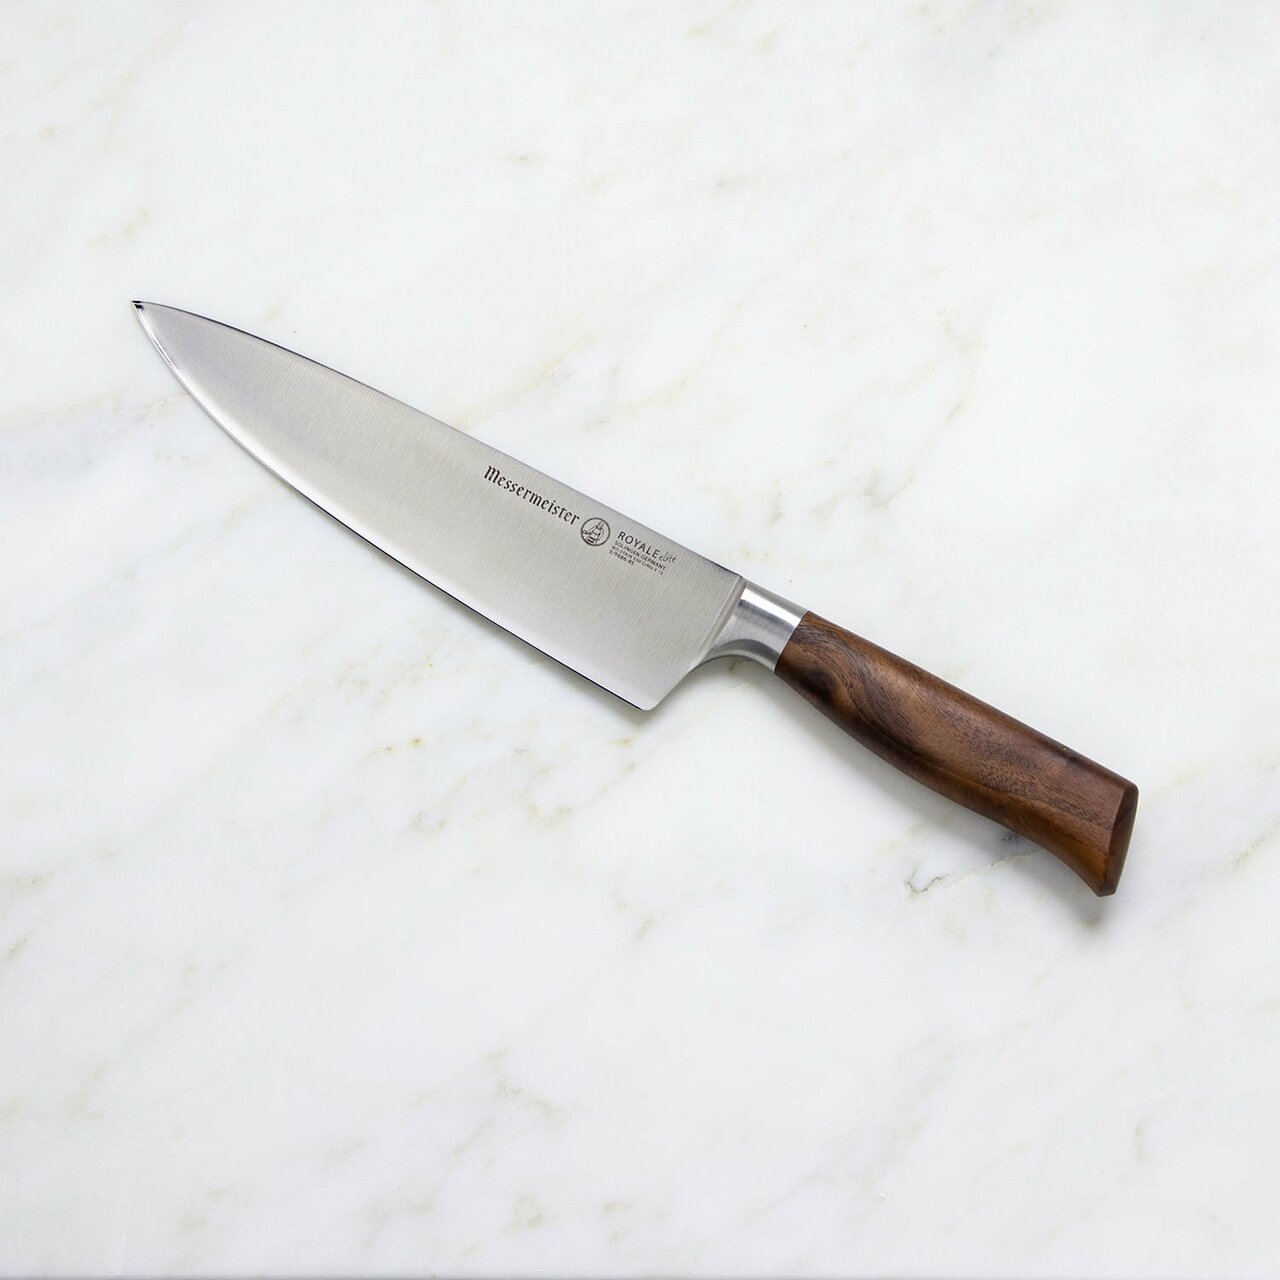 BEON.COM.AU E9686 8S         Royal Elite Stealth Chef's Knife 8 Inch The Messermeister Royale Elité Stealth Chef’s Knife is the workhorse in every kitchen. You will gravitate to this knife and will find yourself using it for 90% of all your cutting tasks. The hand forged Stealth blade that is about 25% t... Messermeister at BEON.COM.AU